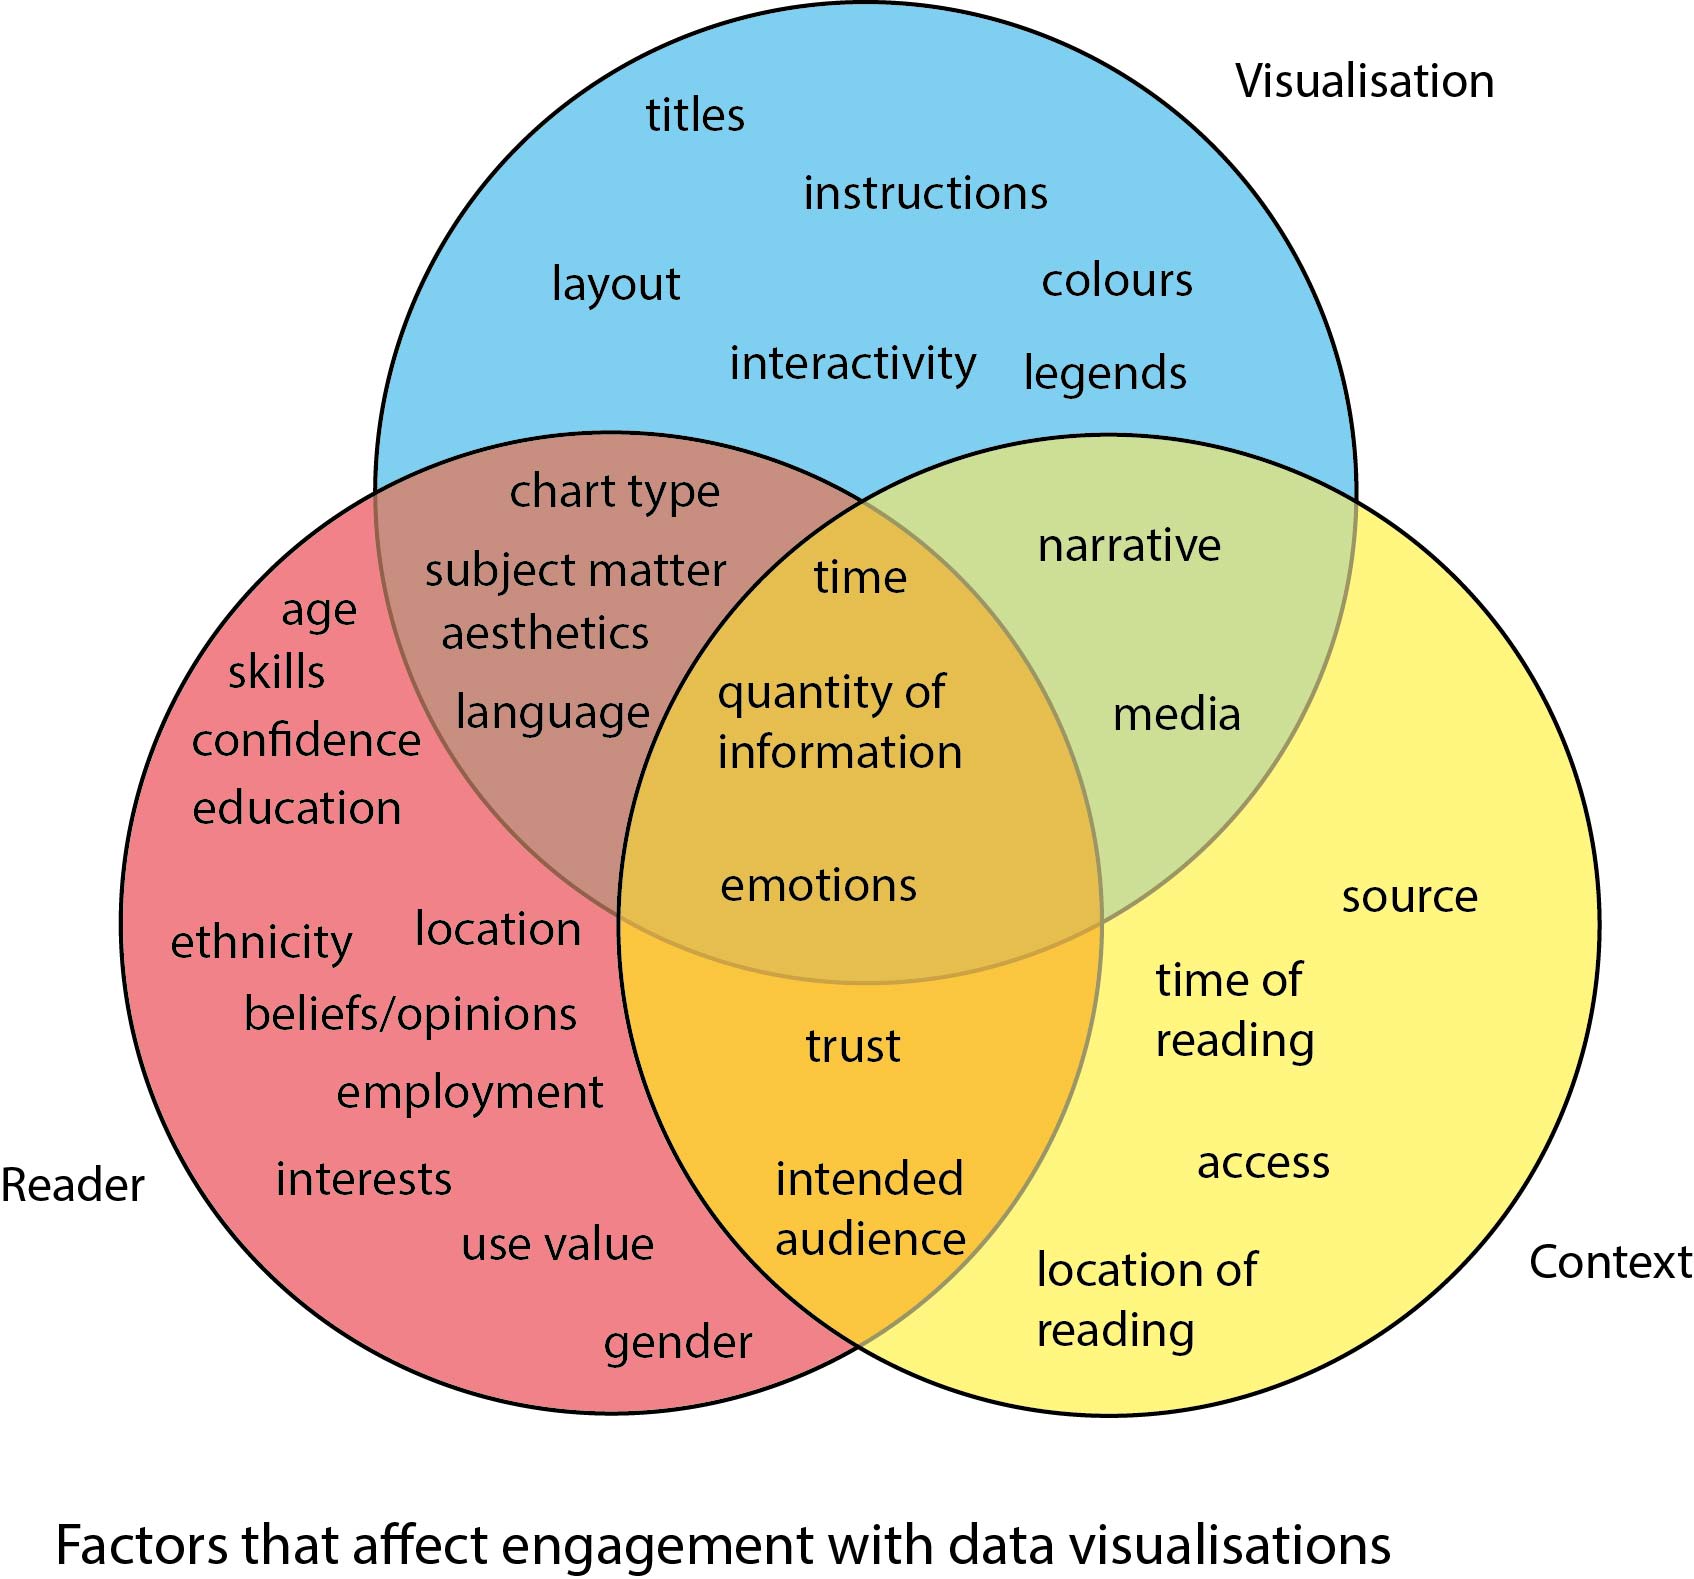 qualitative research in visual analysis